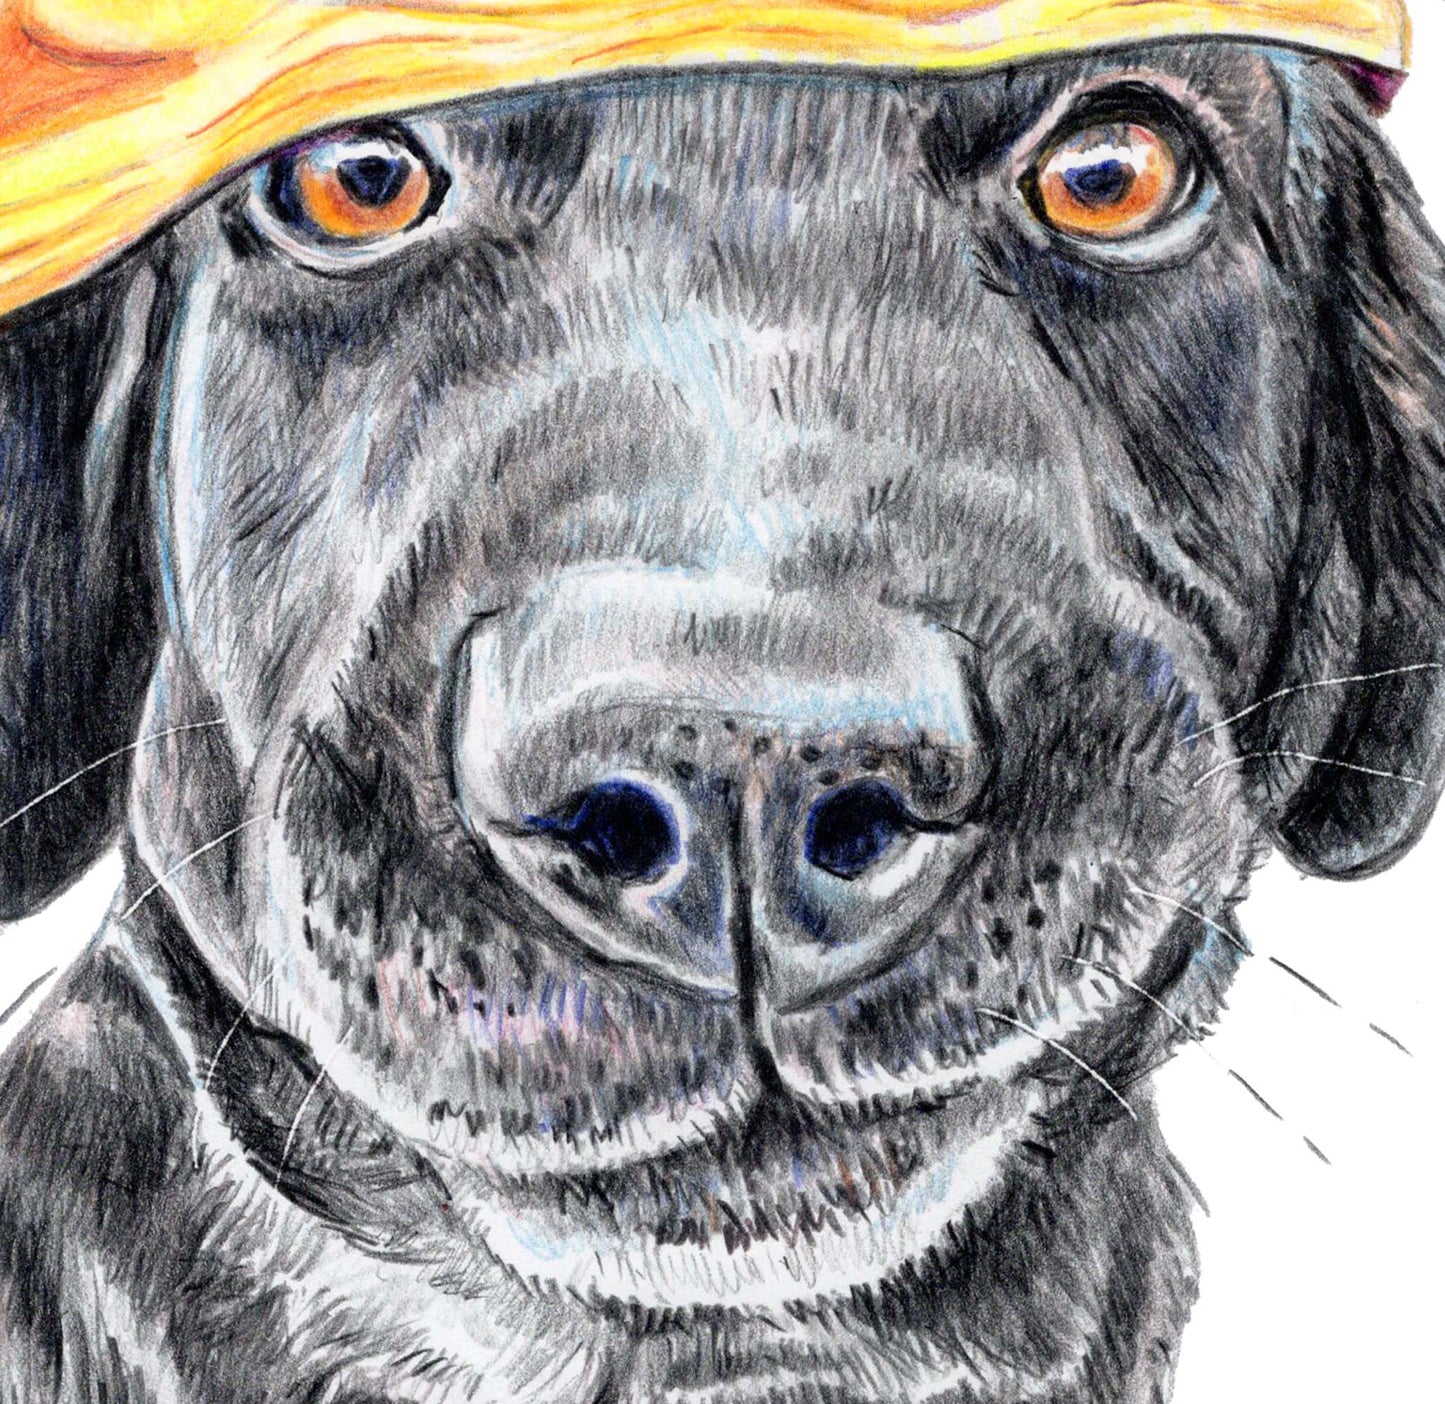 Print of a coloured pencil drawing of a black lab dog wearing an empty chip bag as a hat. Art by Deidre Wicks